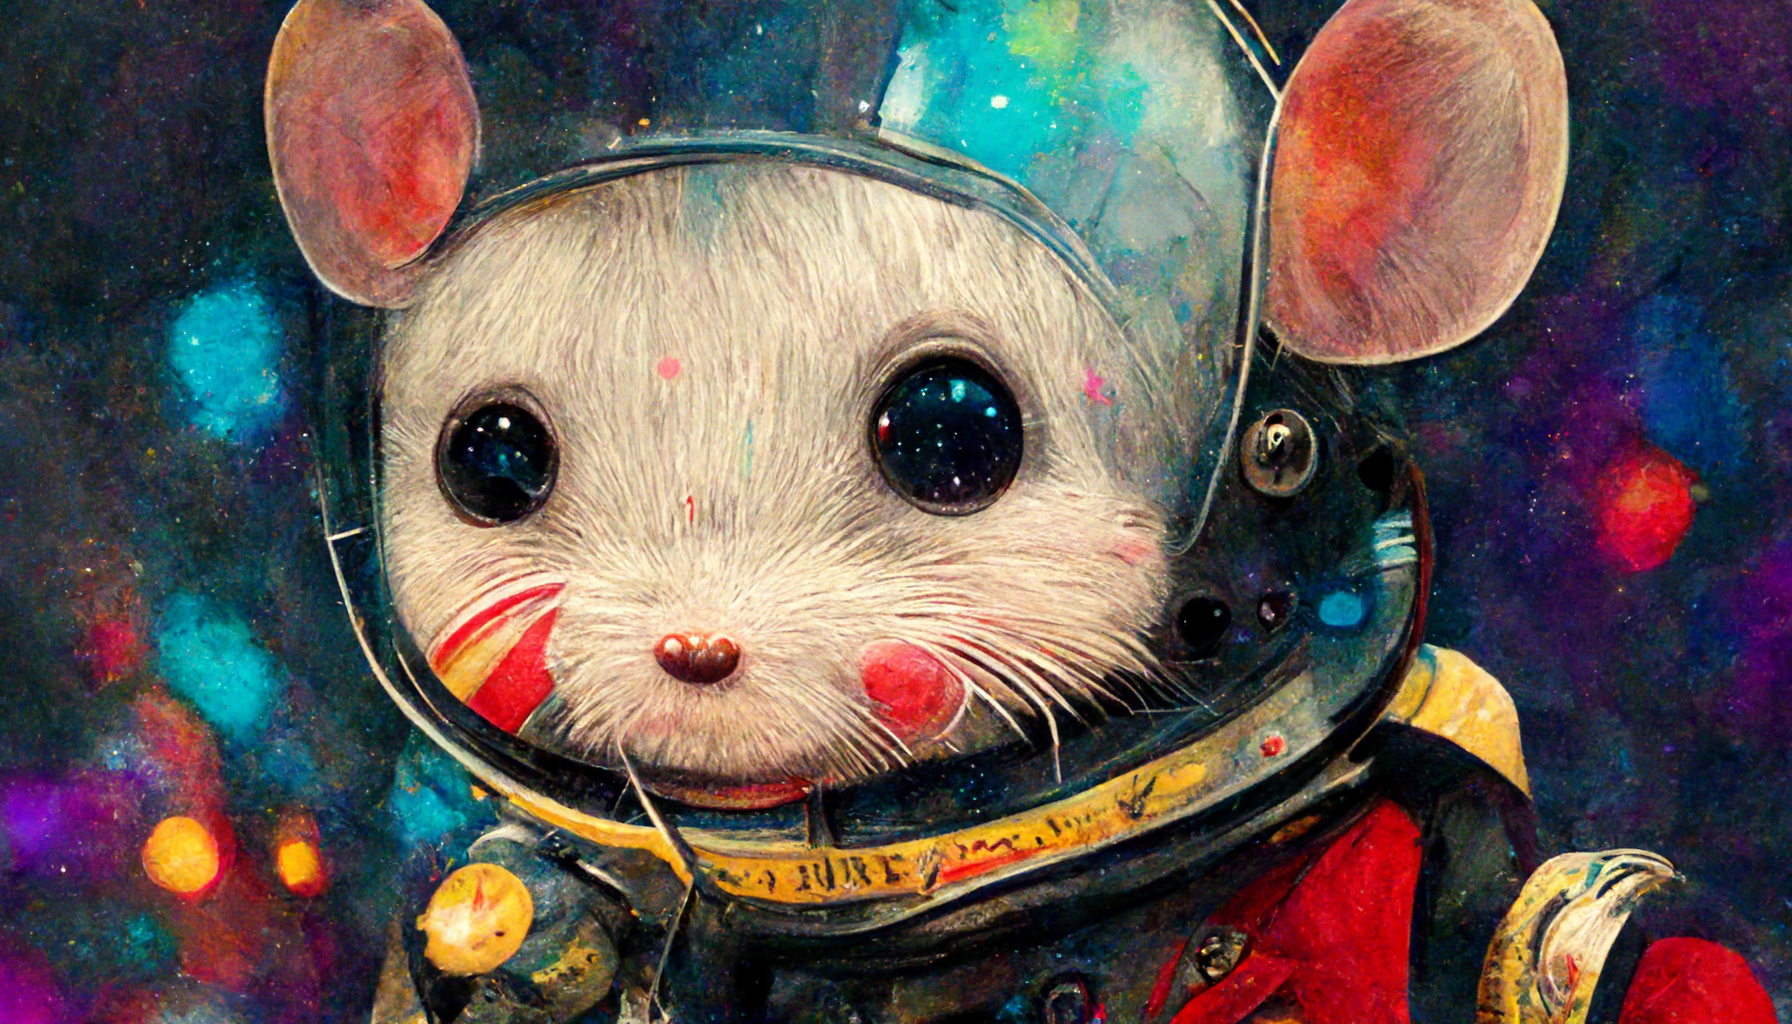 Singer Boy the rat looking cute in a space suit